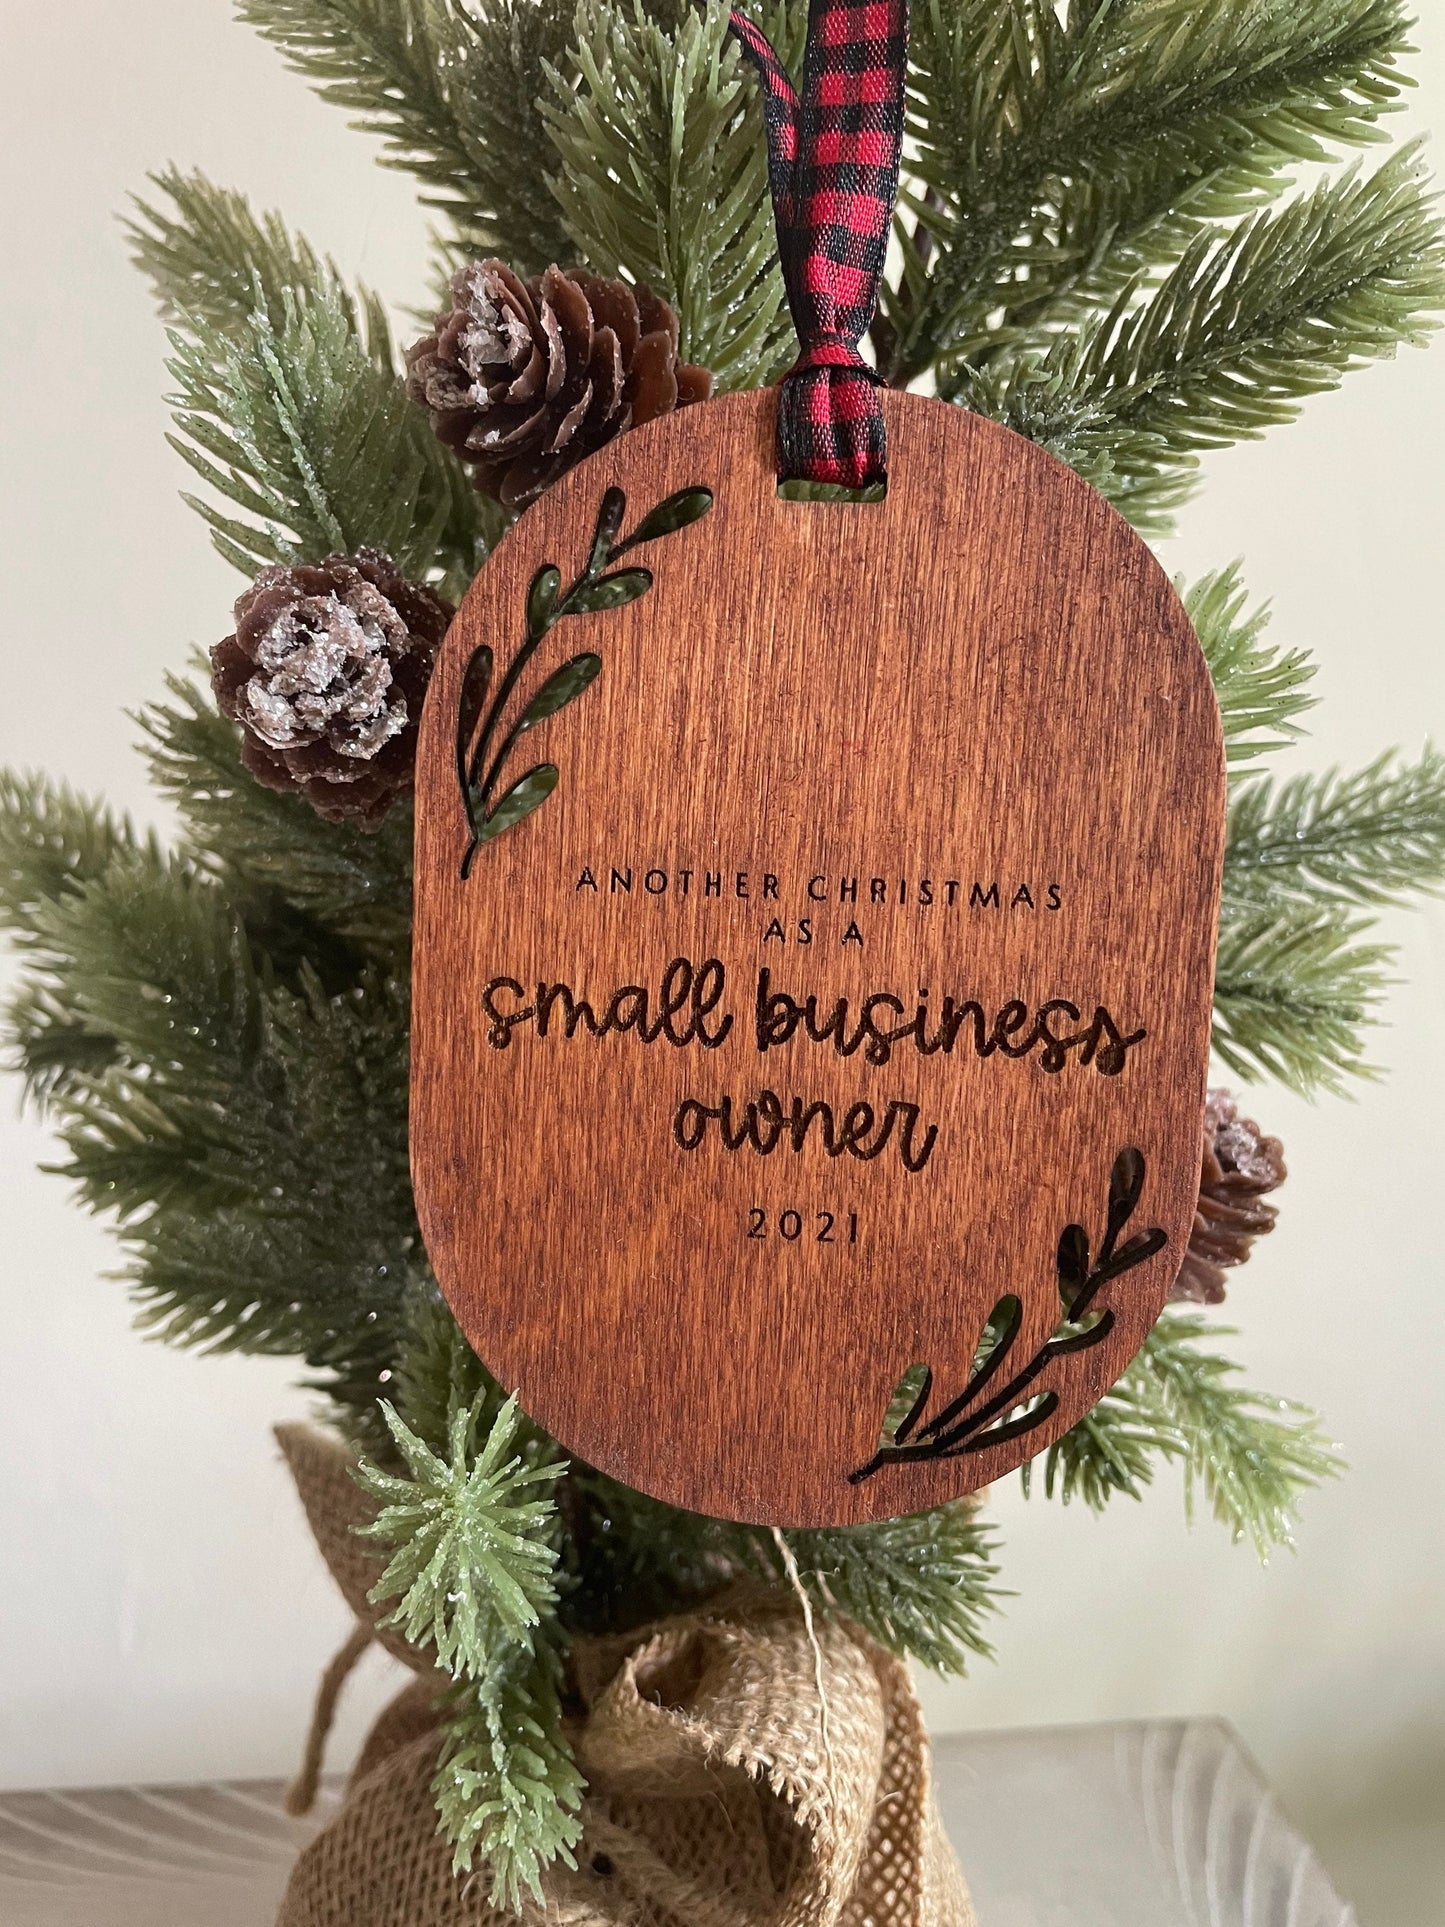 Small Business Ornament